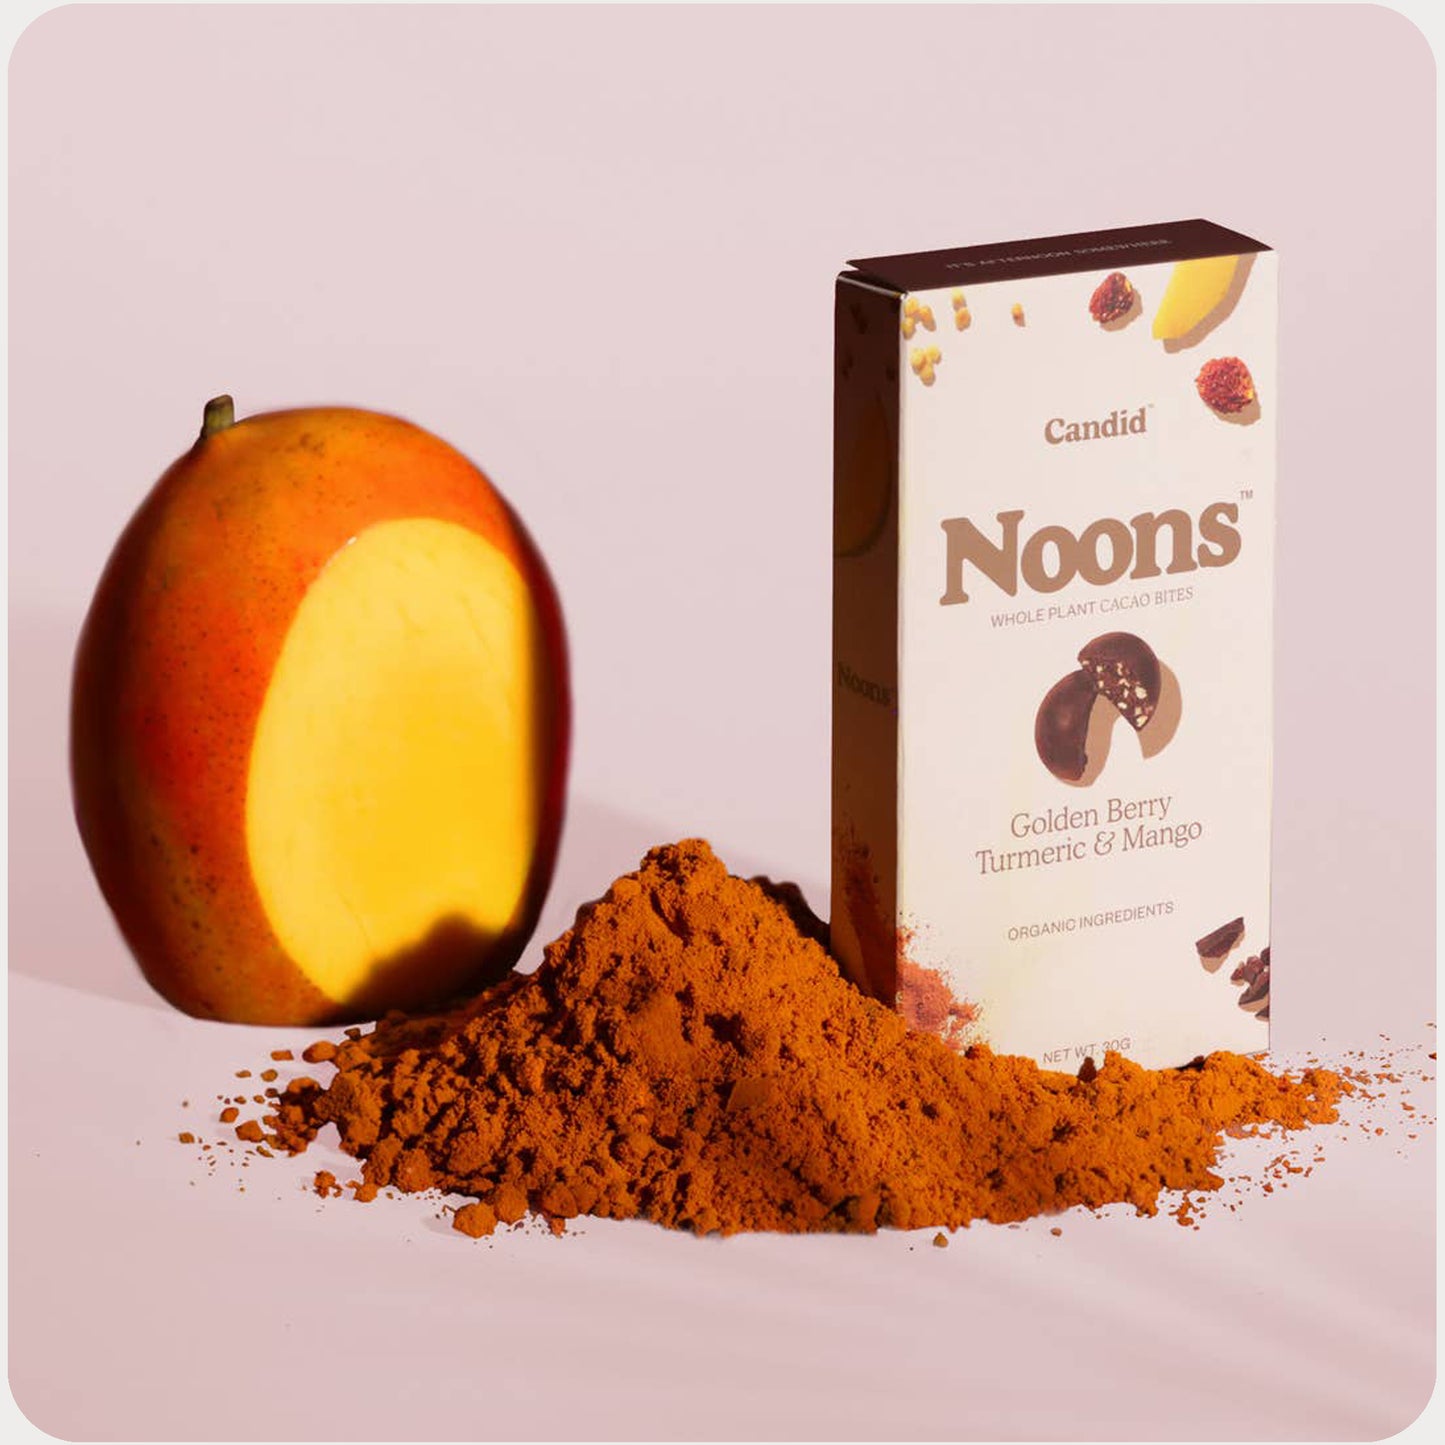 NOONS CACAO BITES